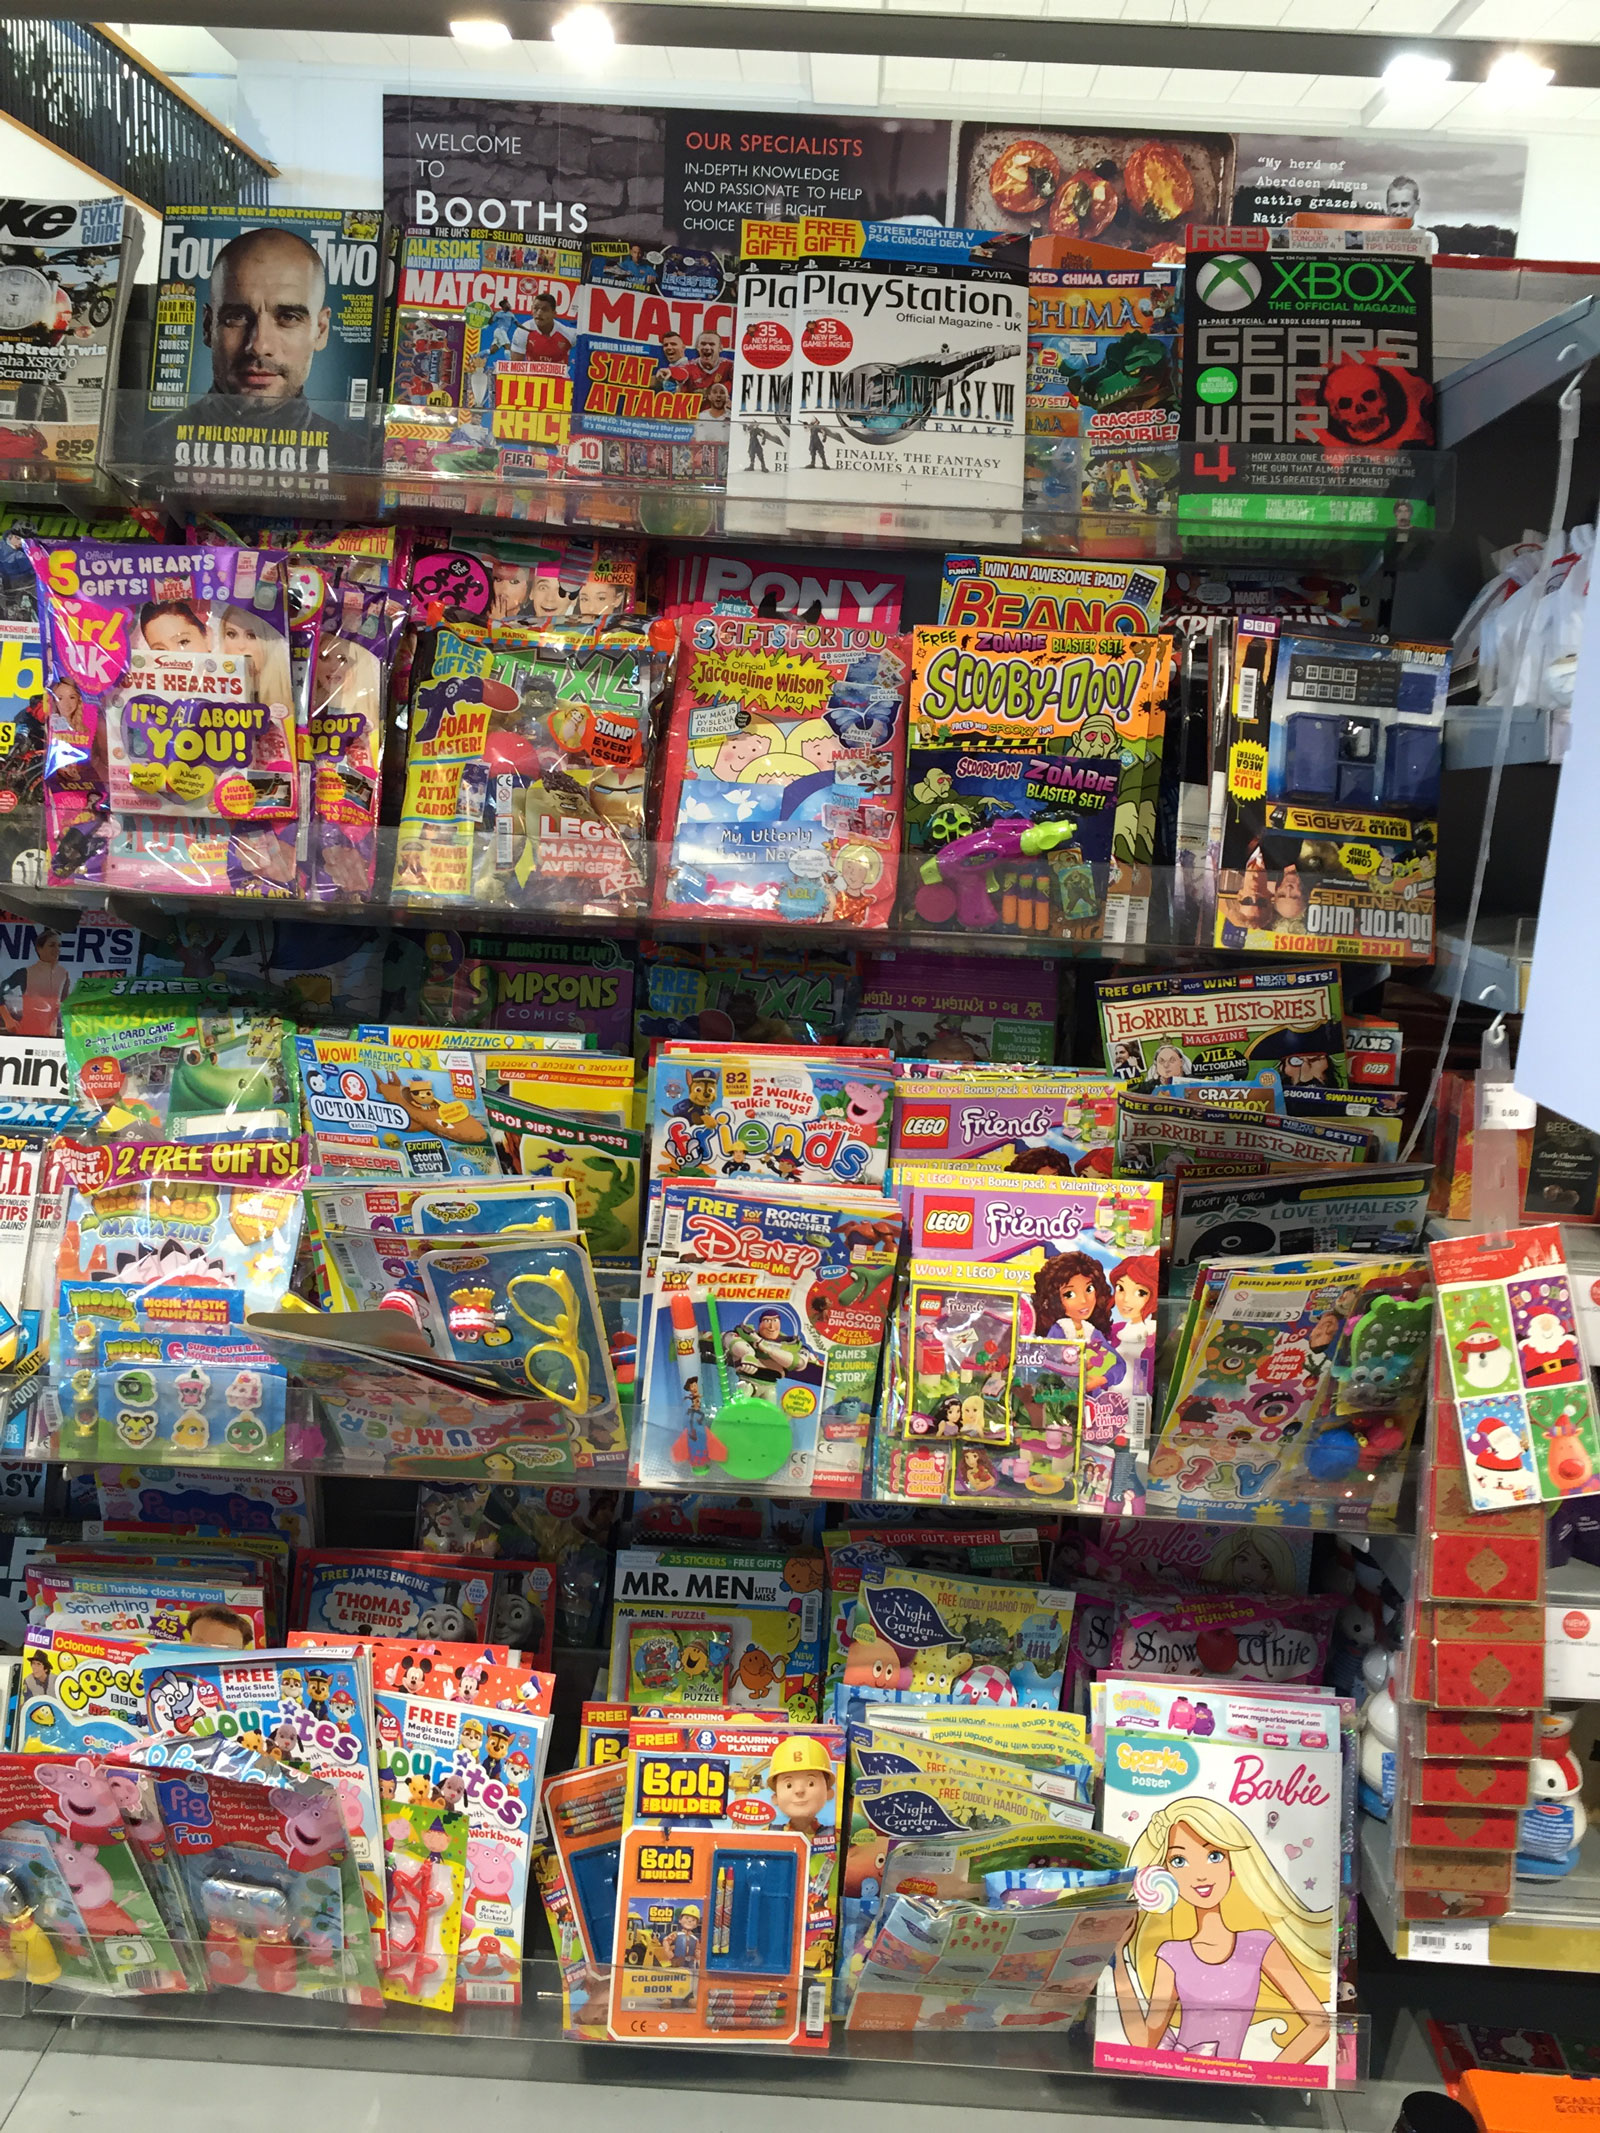 Comics on sale in Booths, Garstang on 9th February 2016